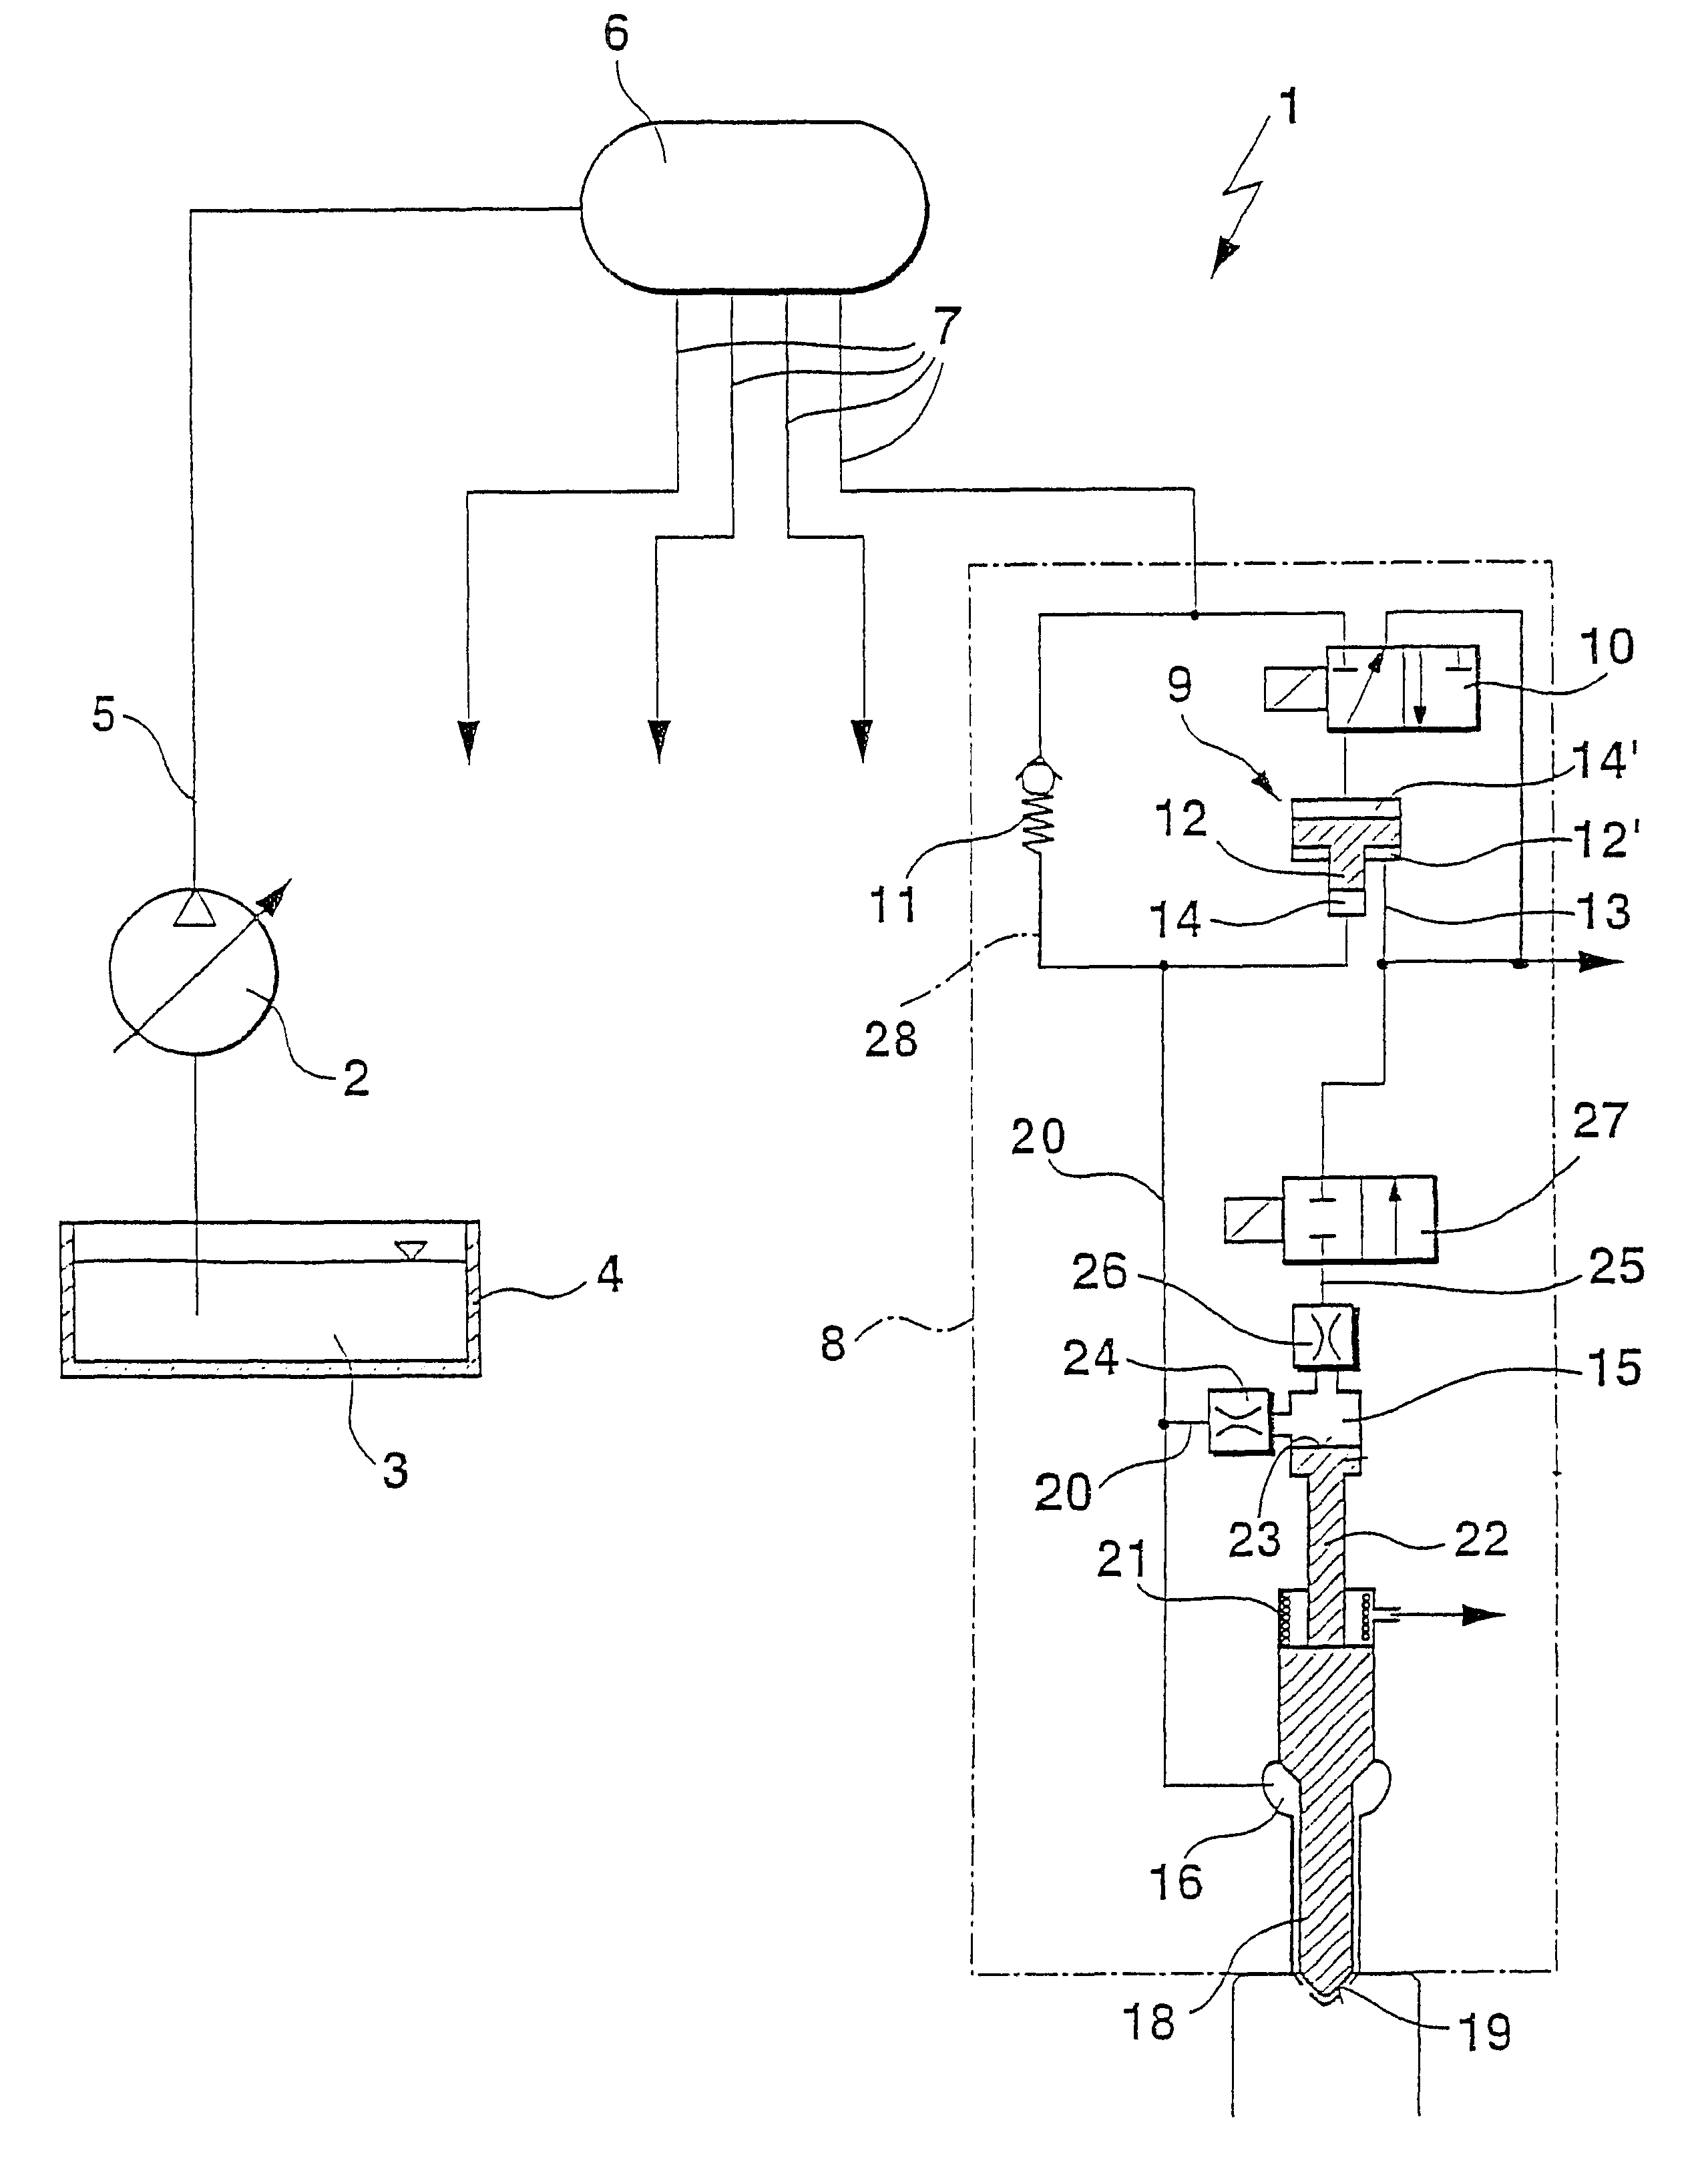 Fuel injection system which uses a pressure step-up unit